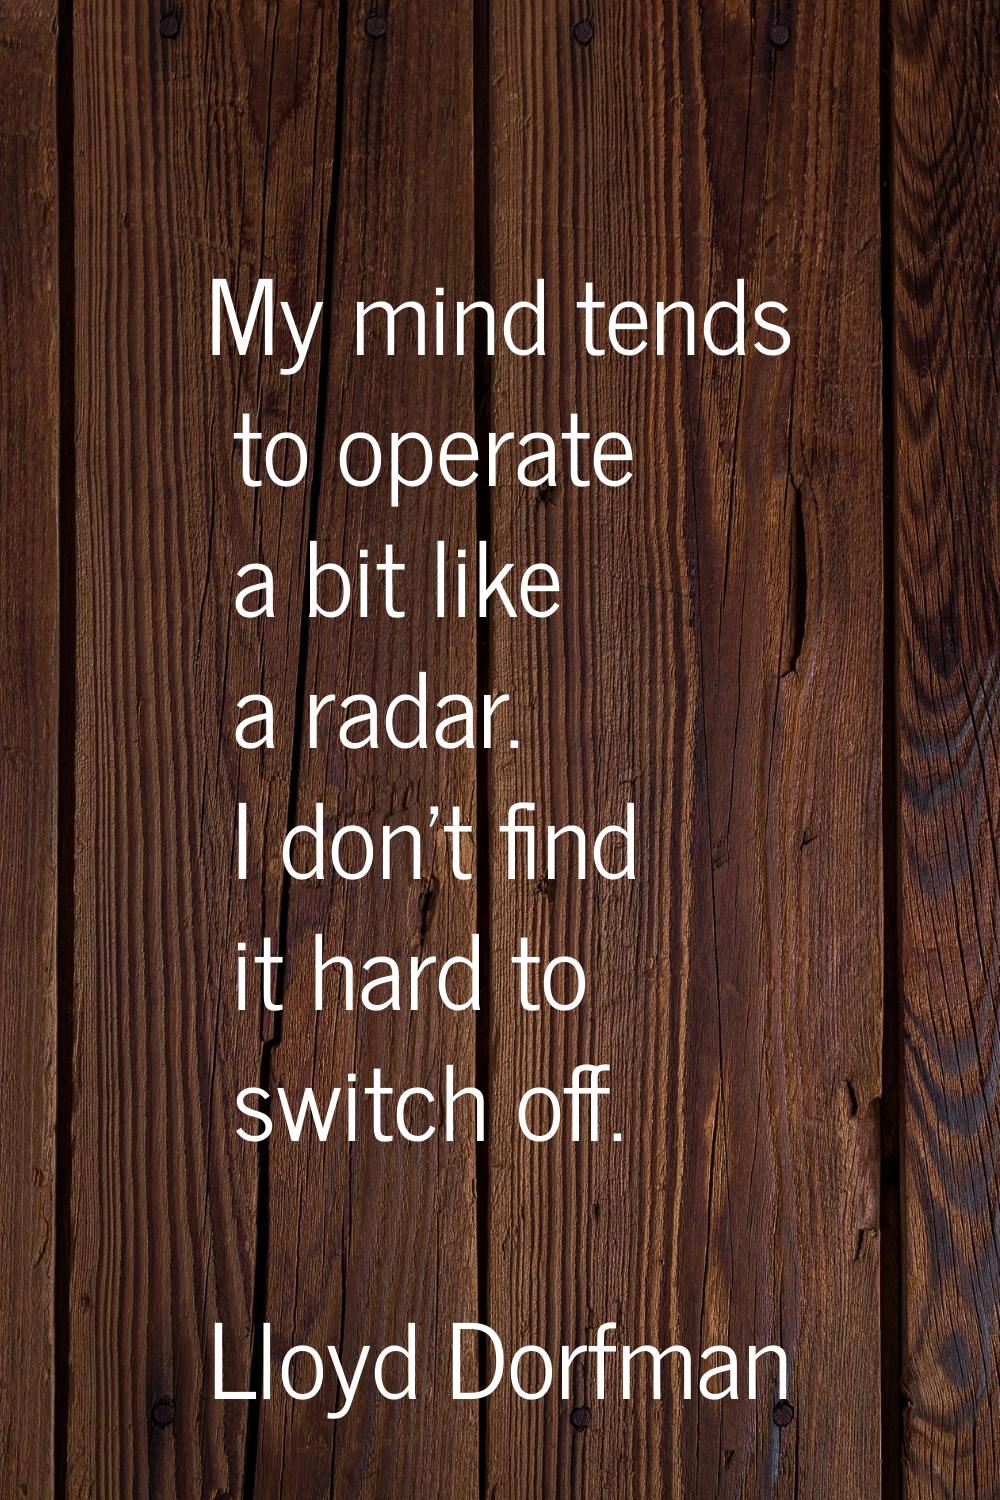 My mind tends to operate a bit like a radar. I don't find it hard to switch off.